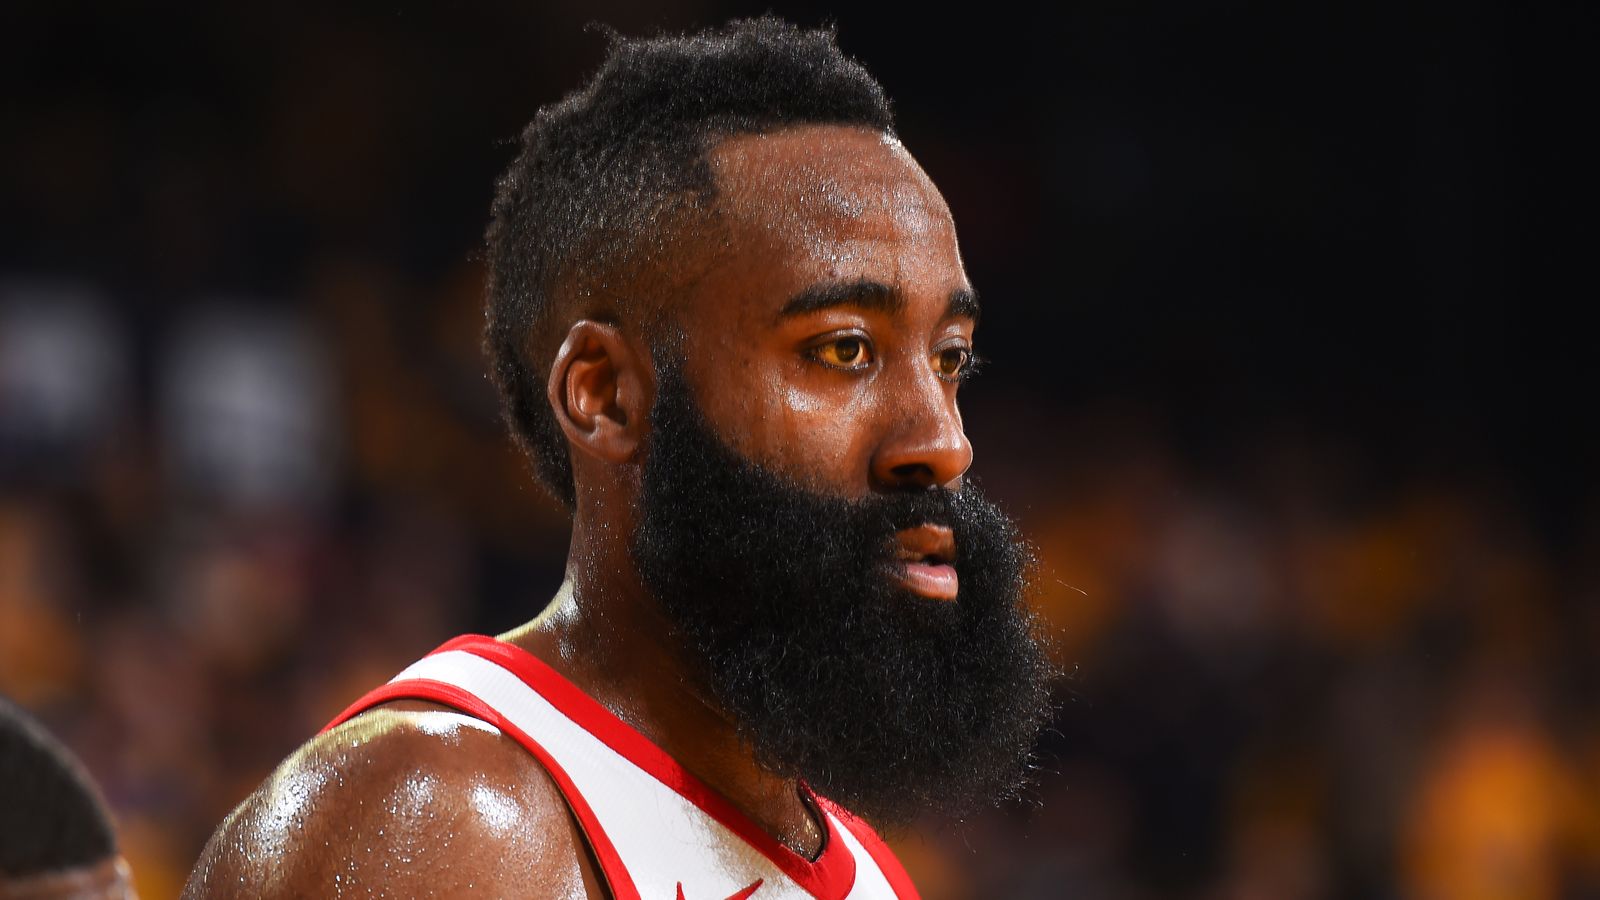 Houston Rockets' James Harden named NBA's Most Valuable Player